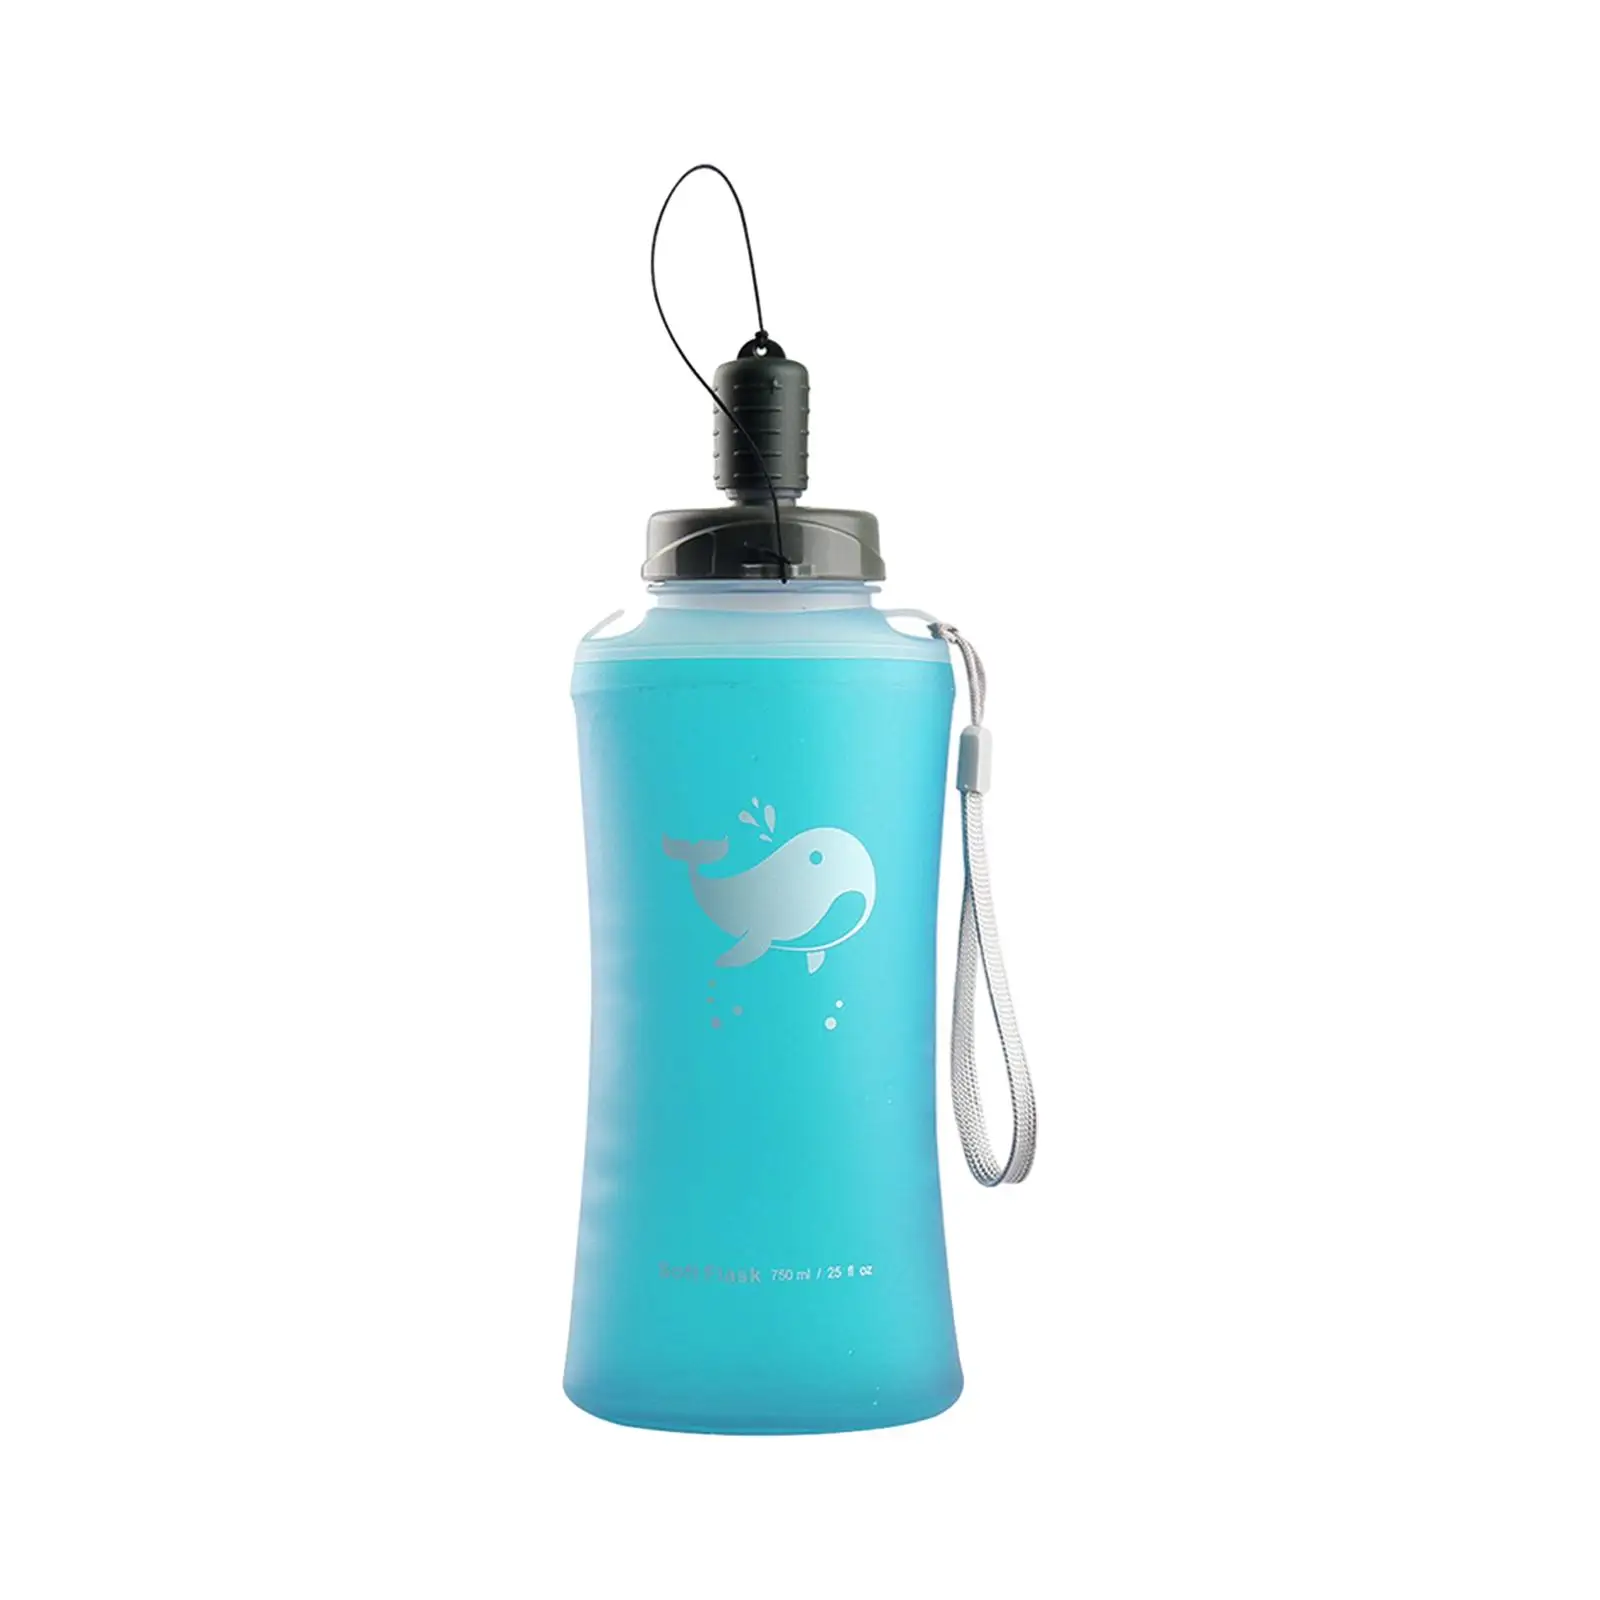 Collapsible Water Bottle Folding Durable Soft Flask for Running Outdoor Bike